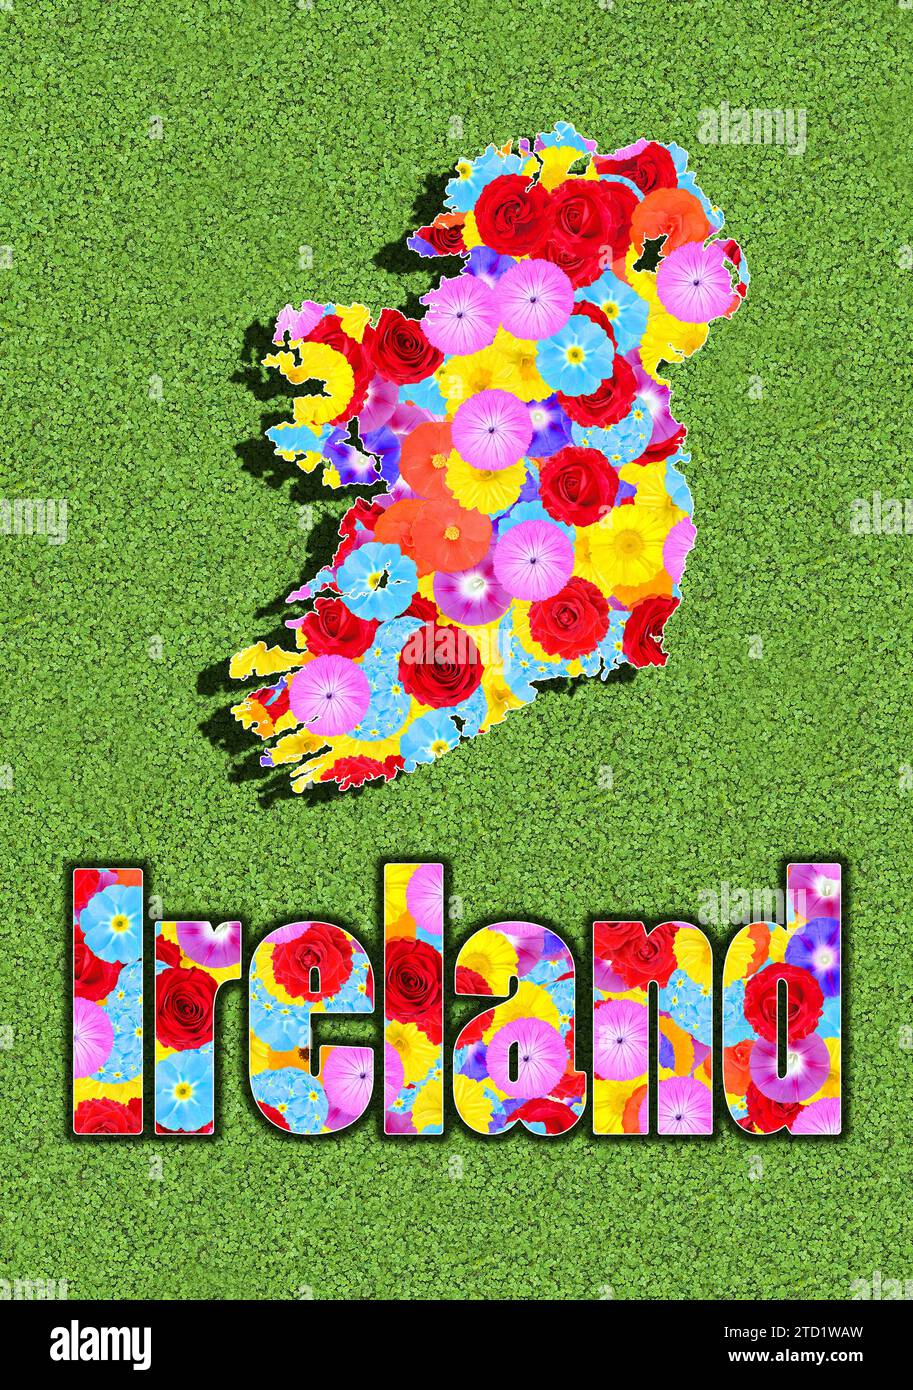 outline and written word of Ireland, with colorful flowers on a green meadow, graphic, writing Stock Photo